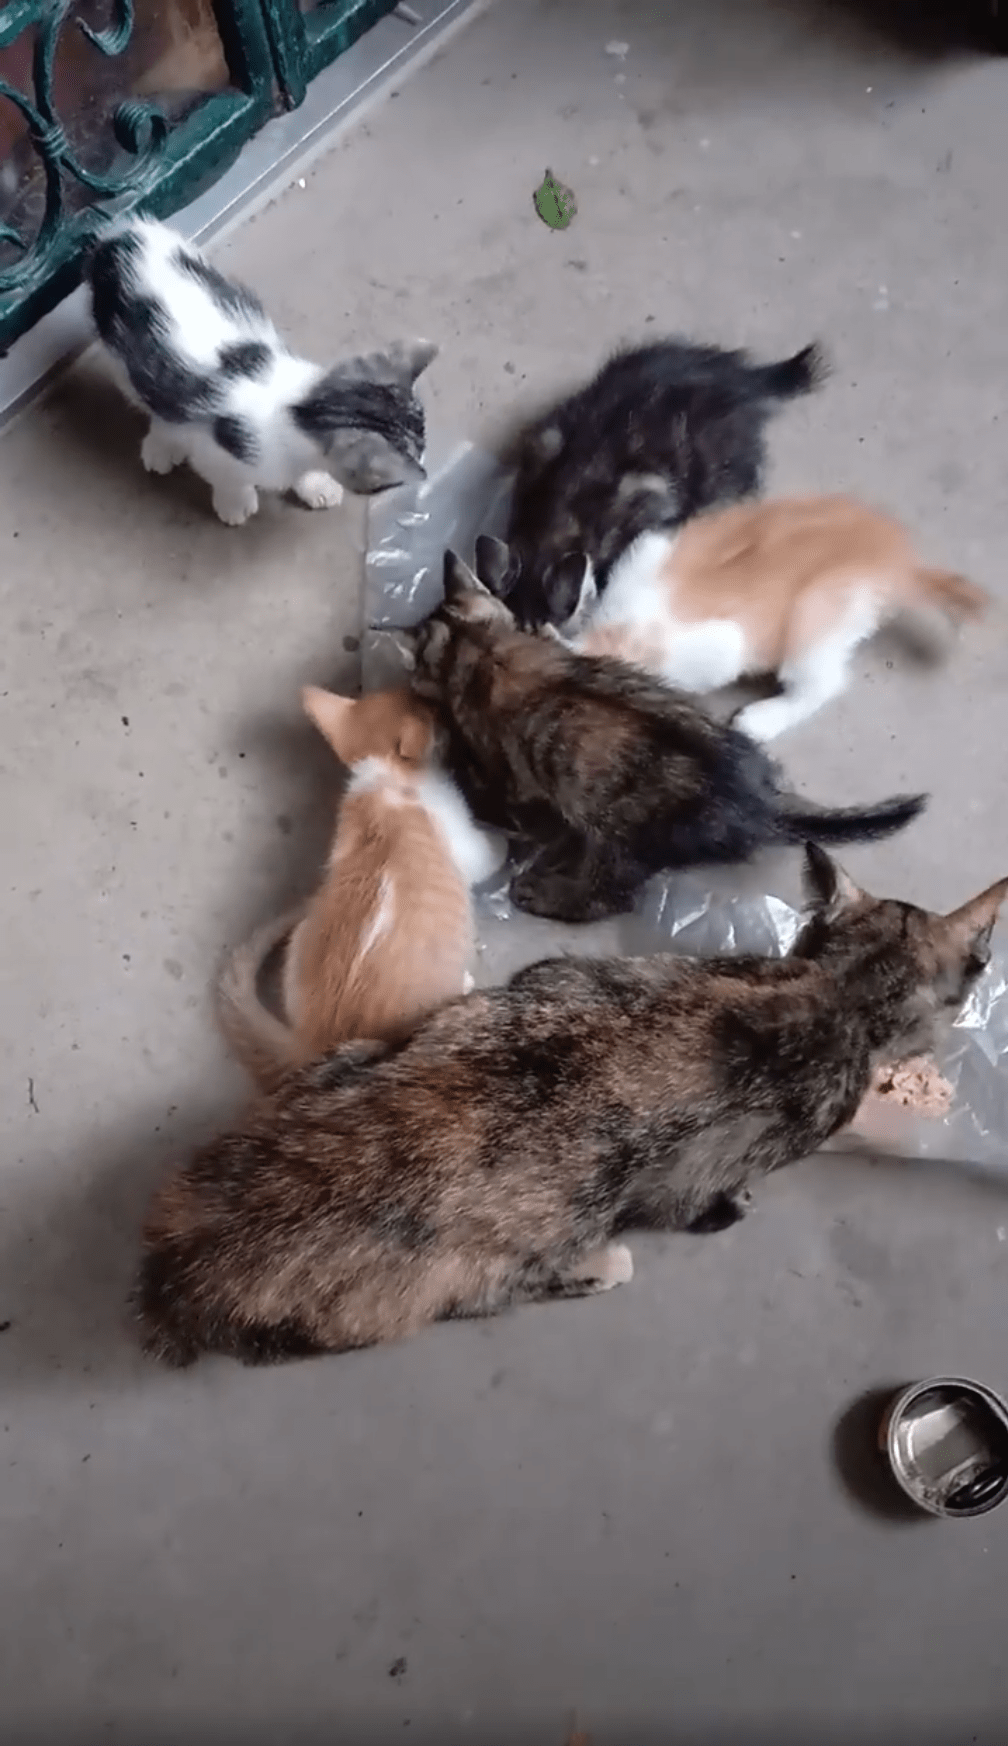 Cats rescued